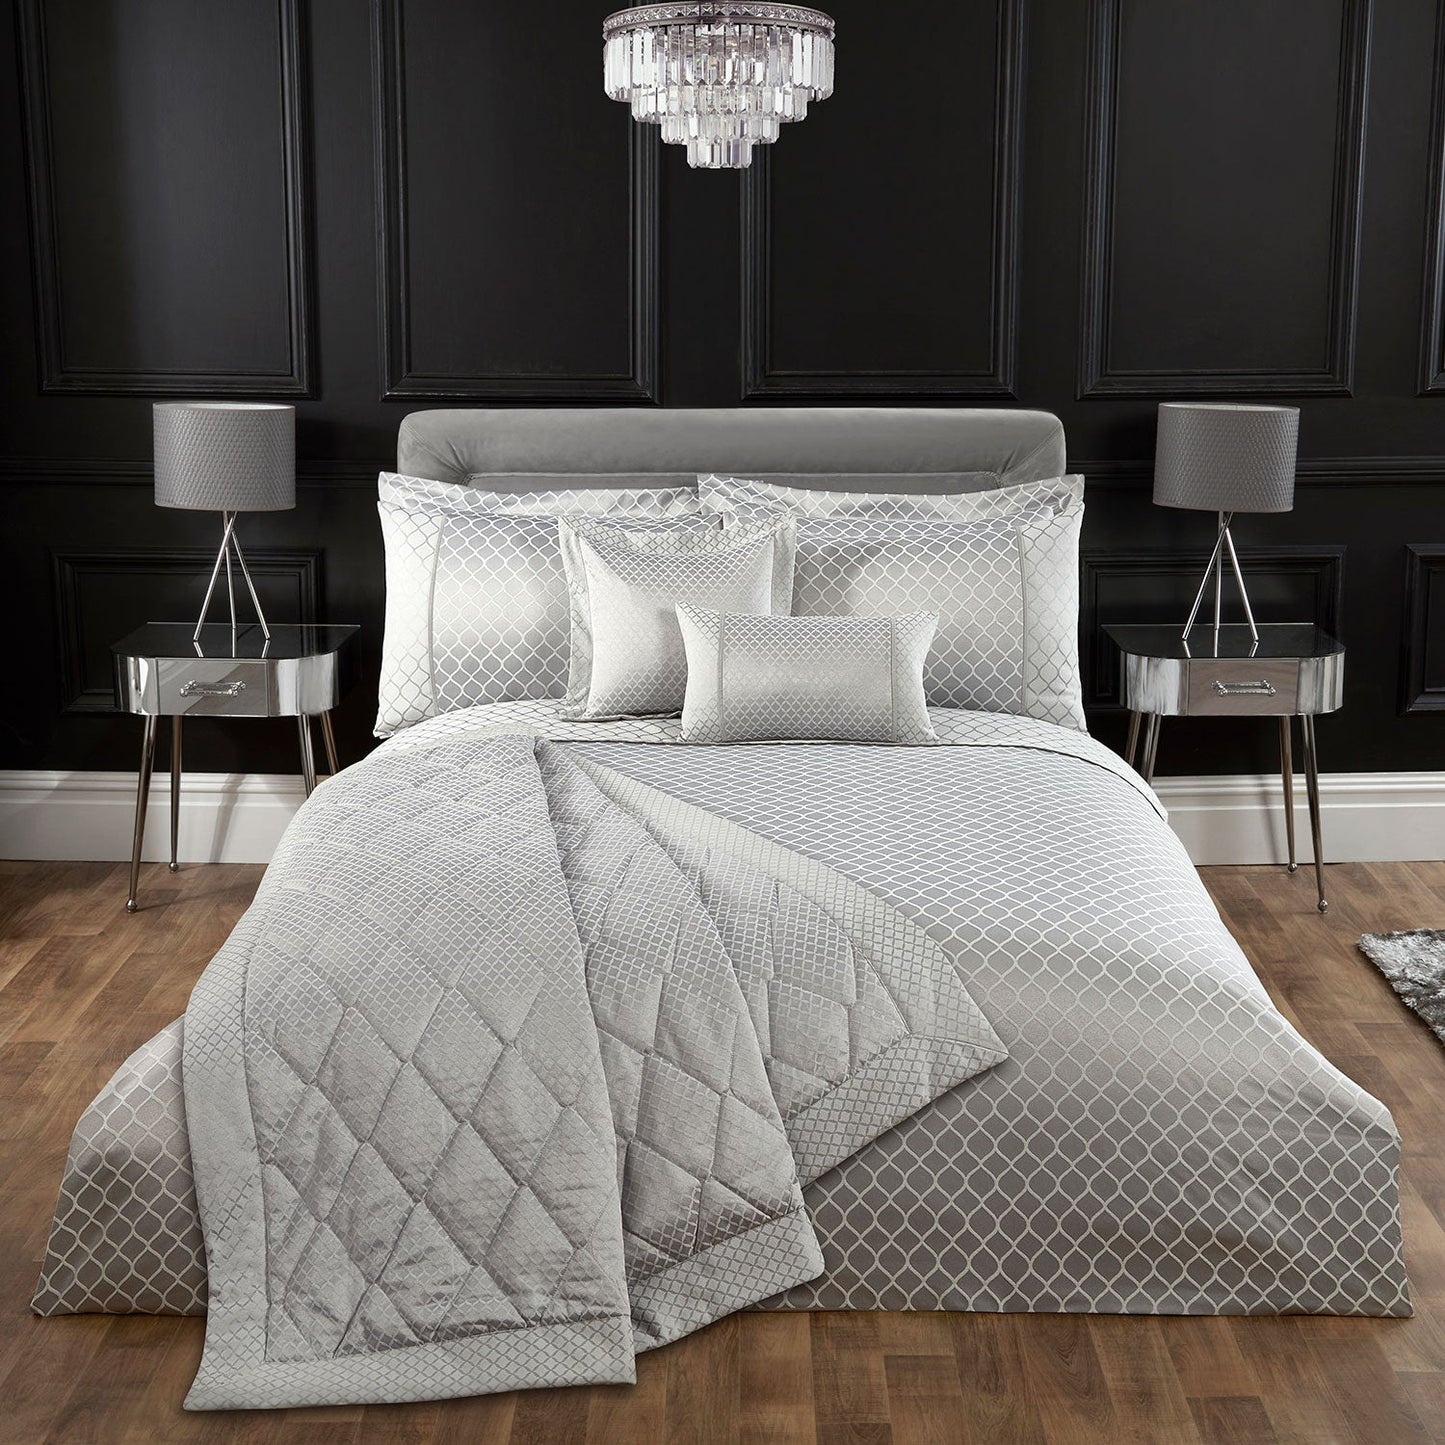 Othello Silver Luxury Quilted Jacquard Throw (160cm x 240cm)